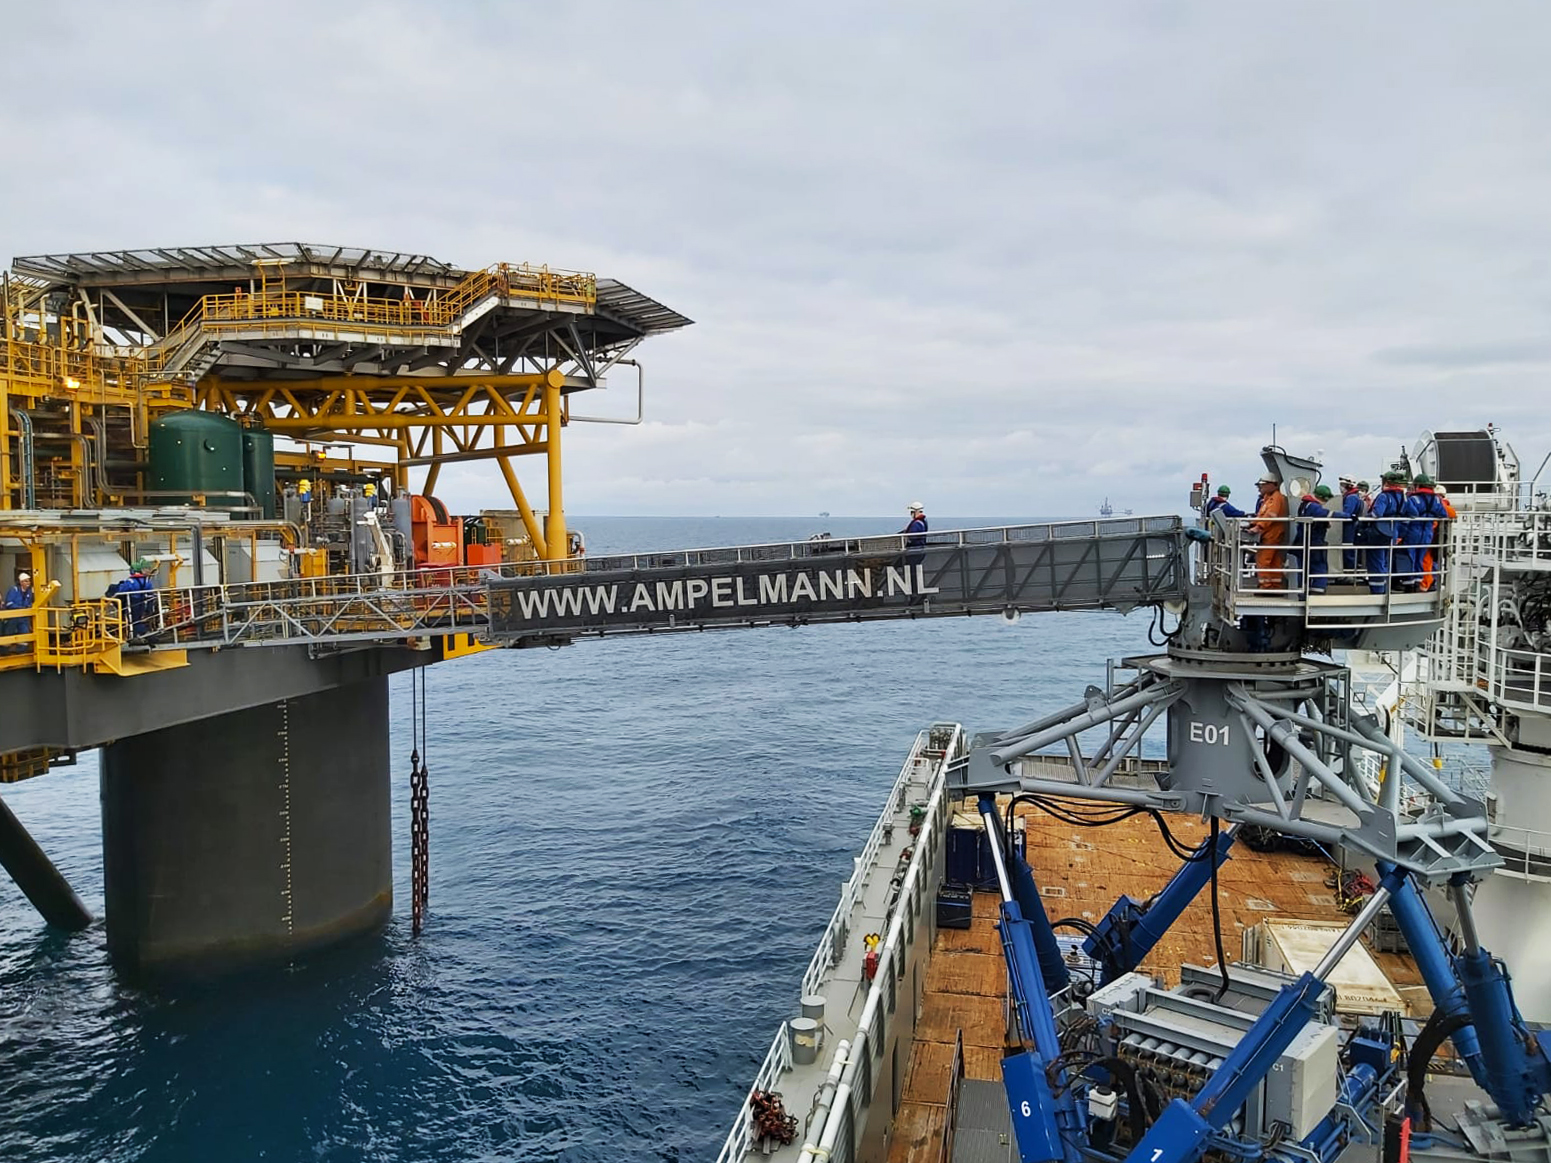 Ampelmann and Olympic Shipping join forces in project for Ithaca Energy in the North Sea